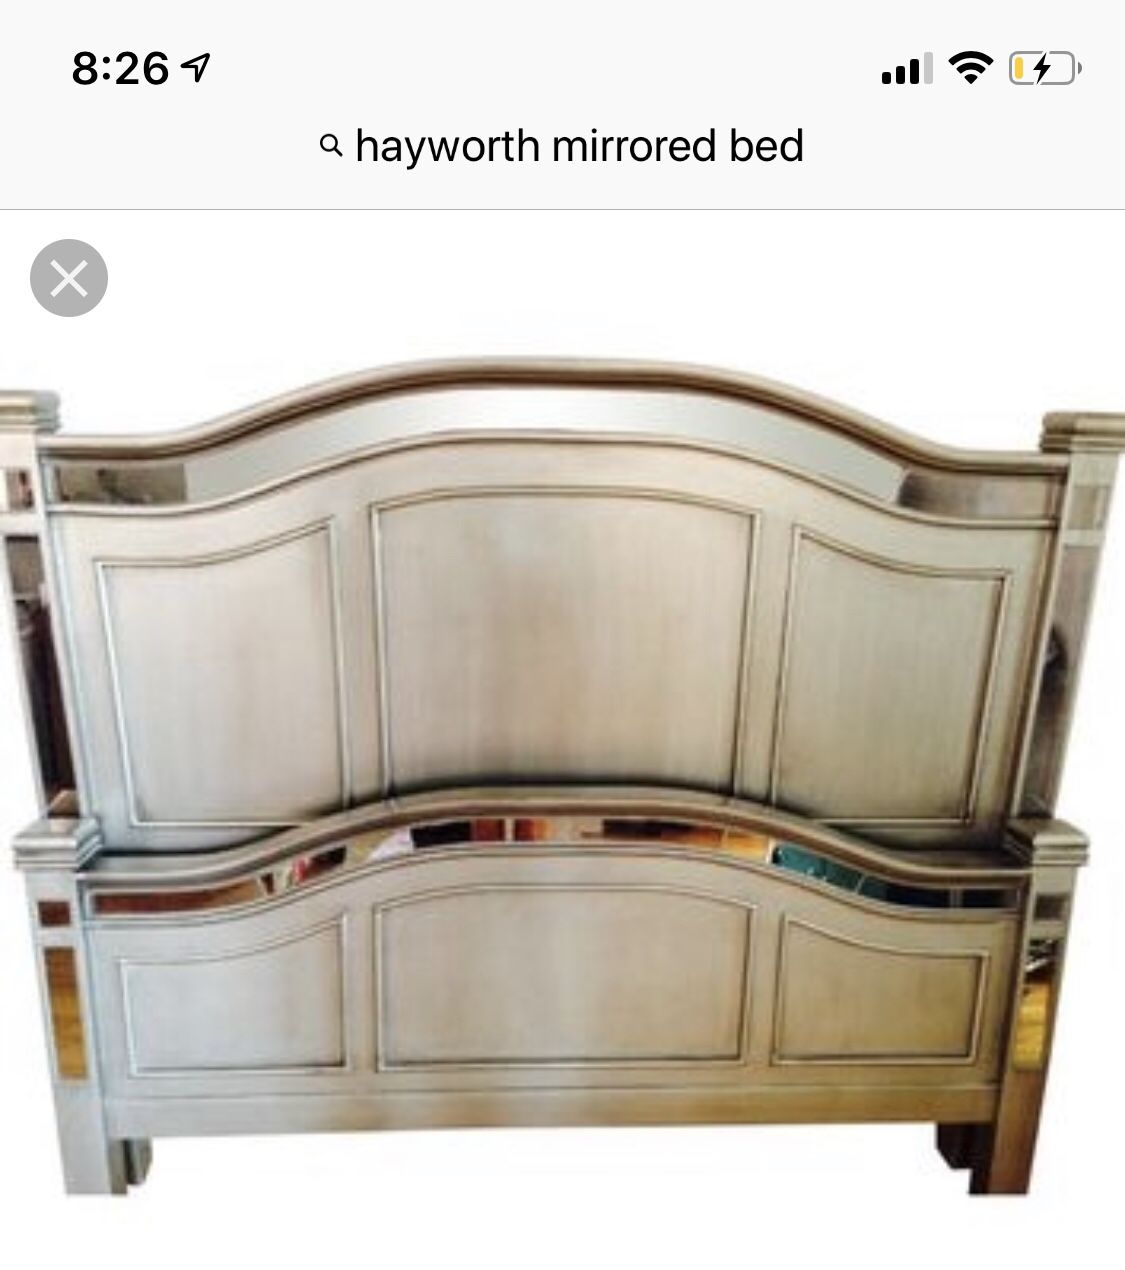 HayWorth Mirrored Queen Bed + Frame